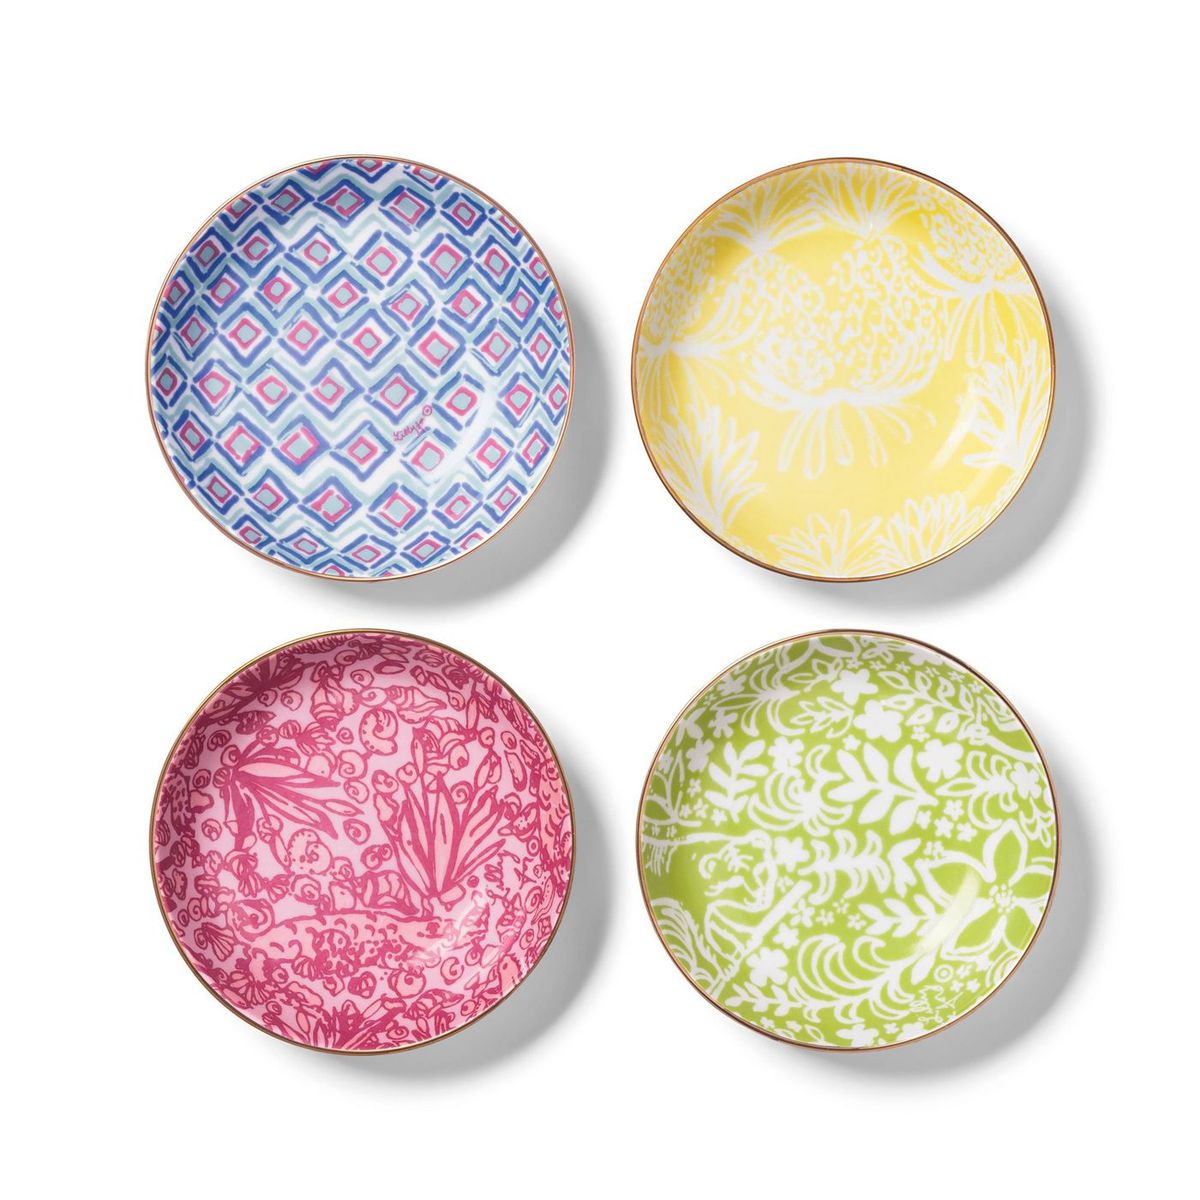 Top view of four round bowls with light colorful designs. 